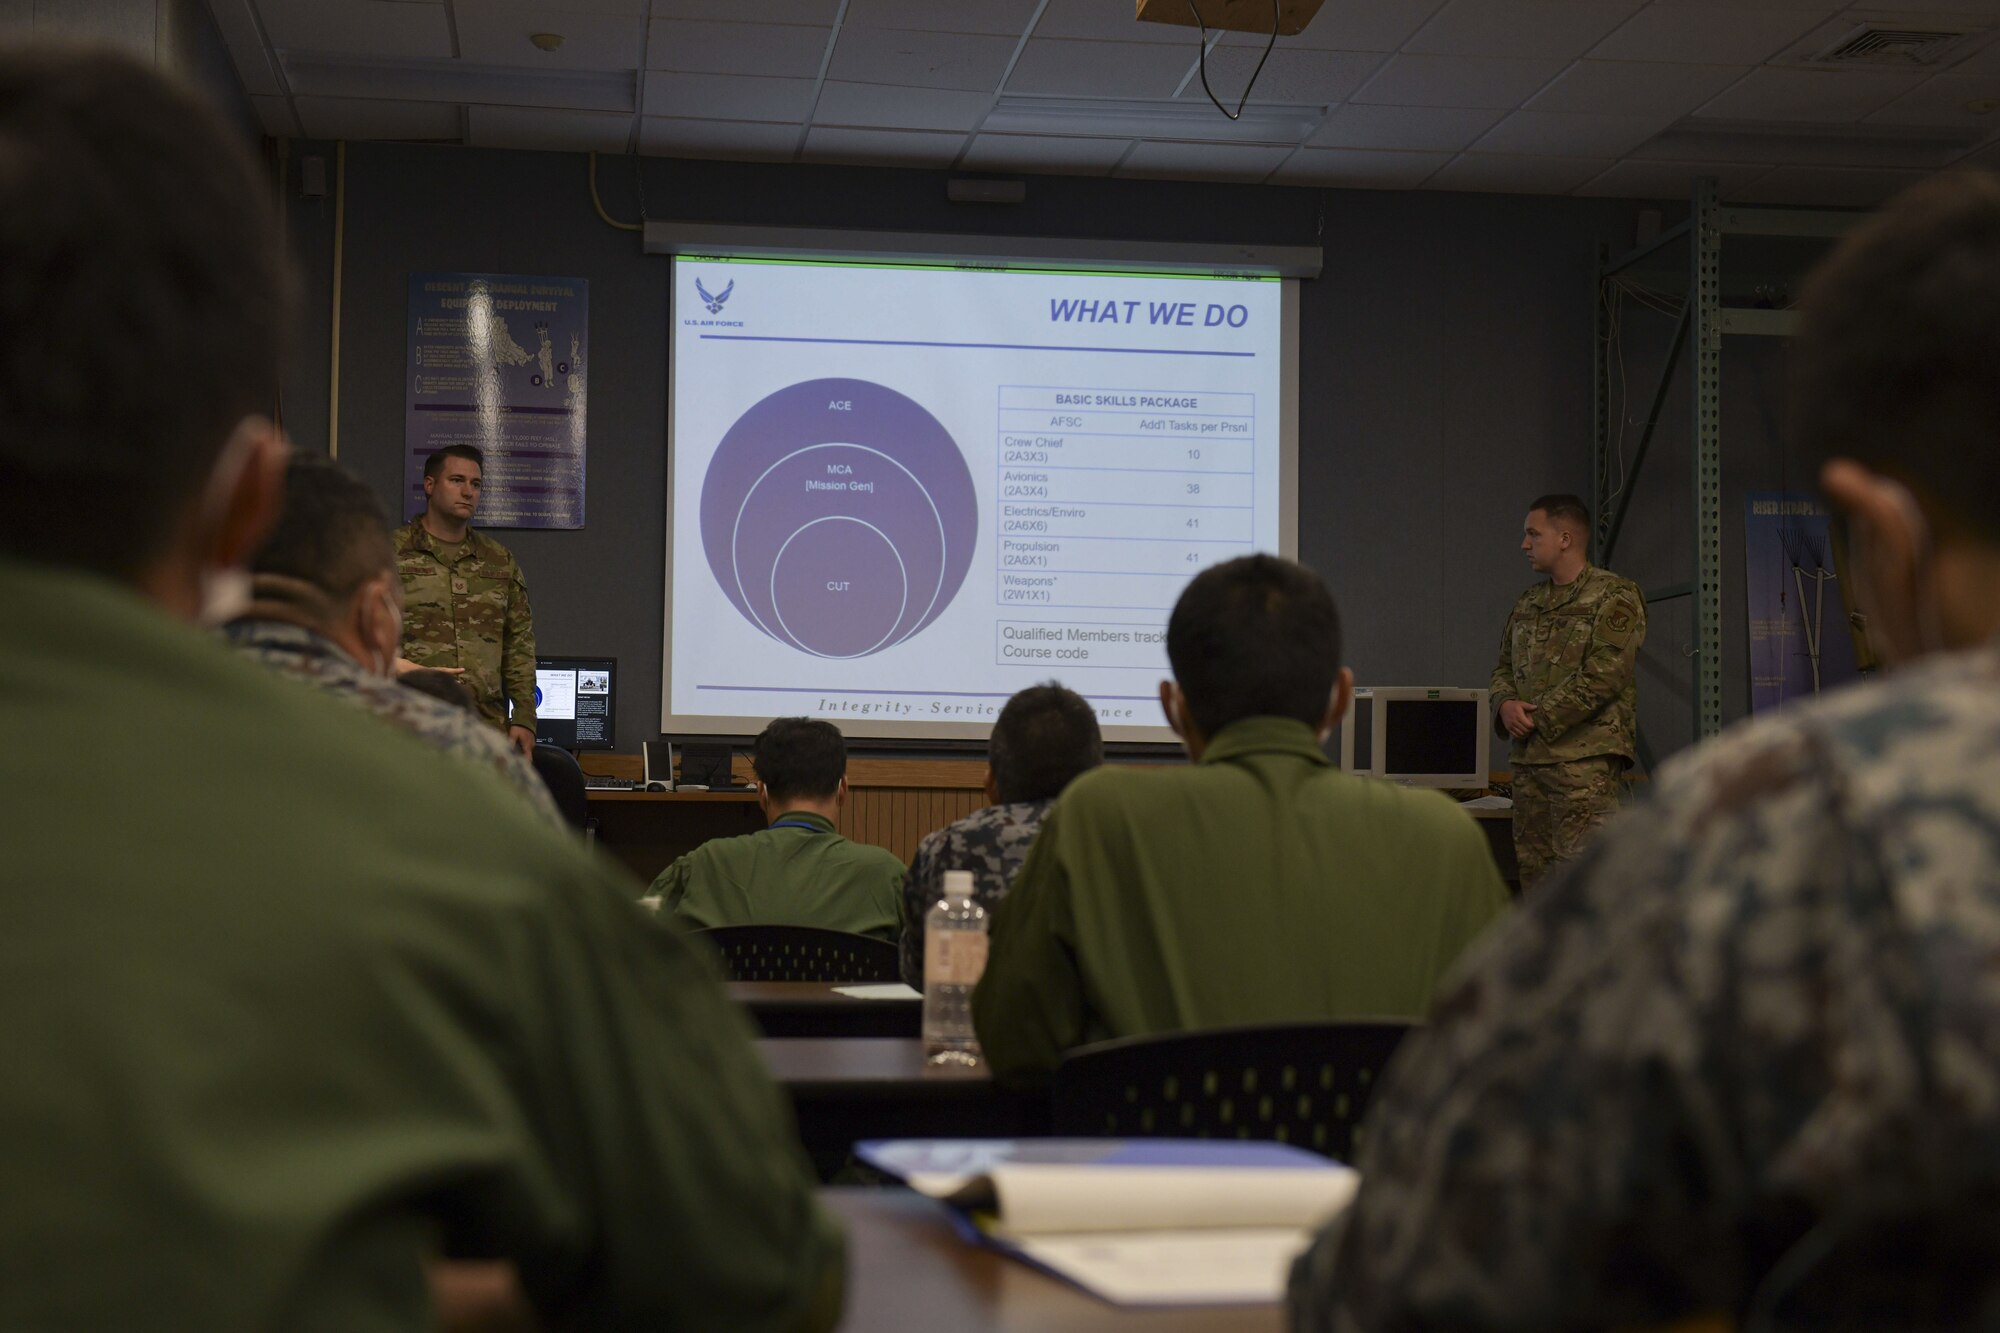 A U.S. Air Force member presents information to a group of Japanese military personnel